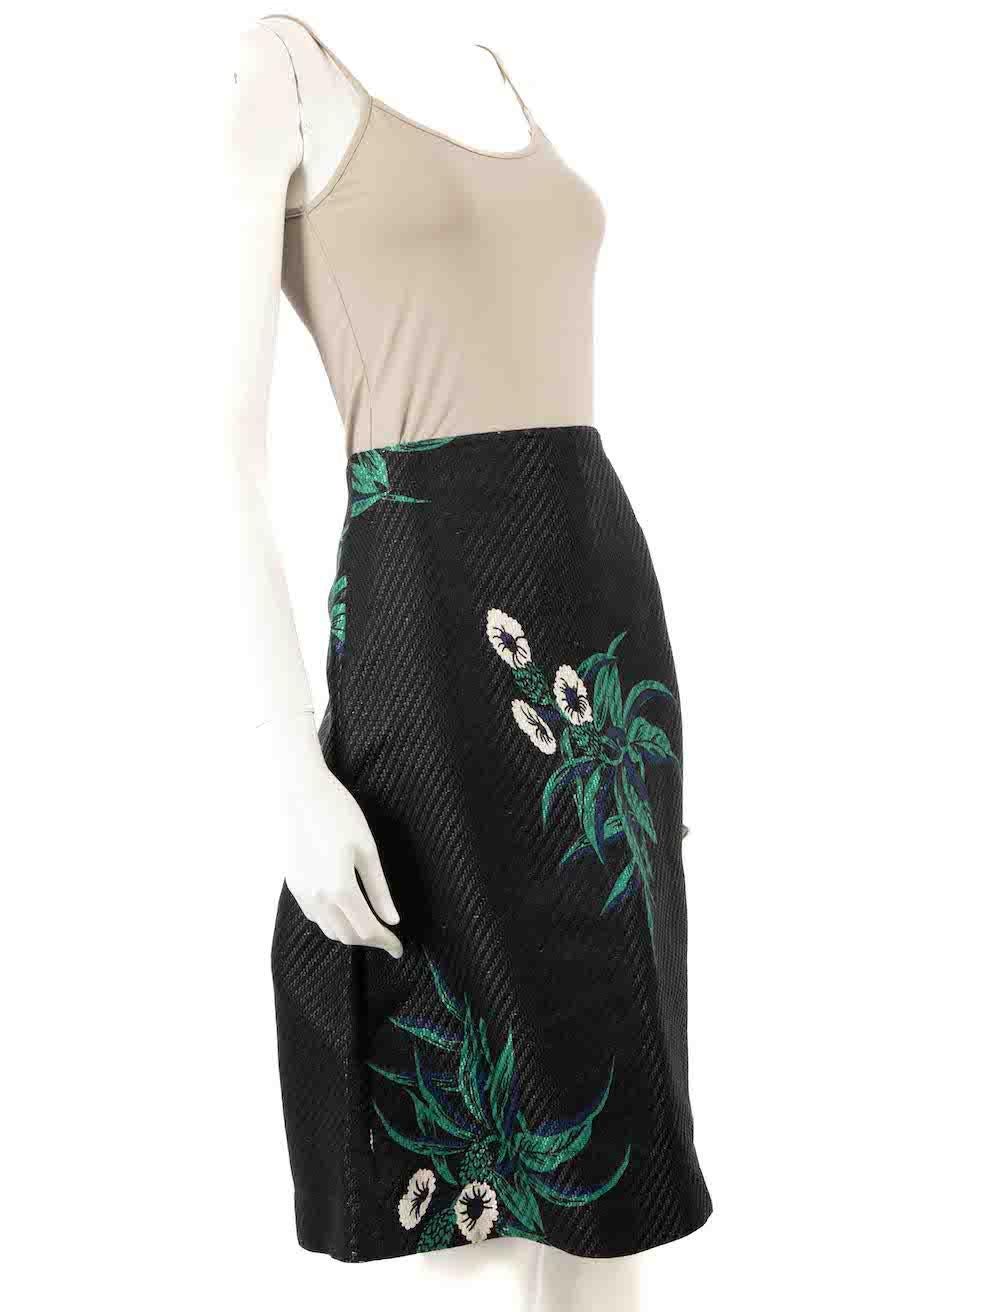 CONDITION is Very good. Hardly any visible wear to skirt is evident on this used Marni designer resale item. Please note that the discoloured threads are natural.
 
 
 
 Details
 
 
 Black
 
 Cotton
 
 Skirt
 
 A-line
 
 Floral pattern
 
 Midi
 
